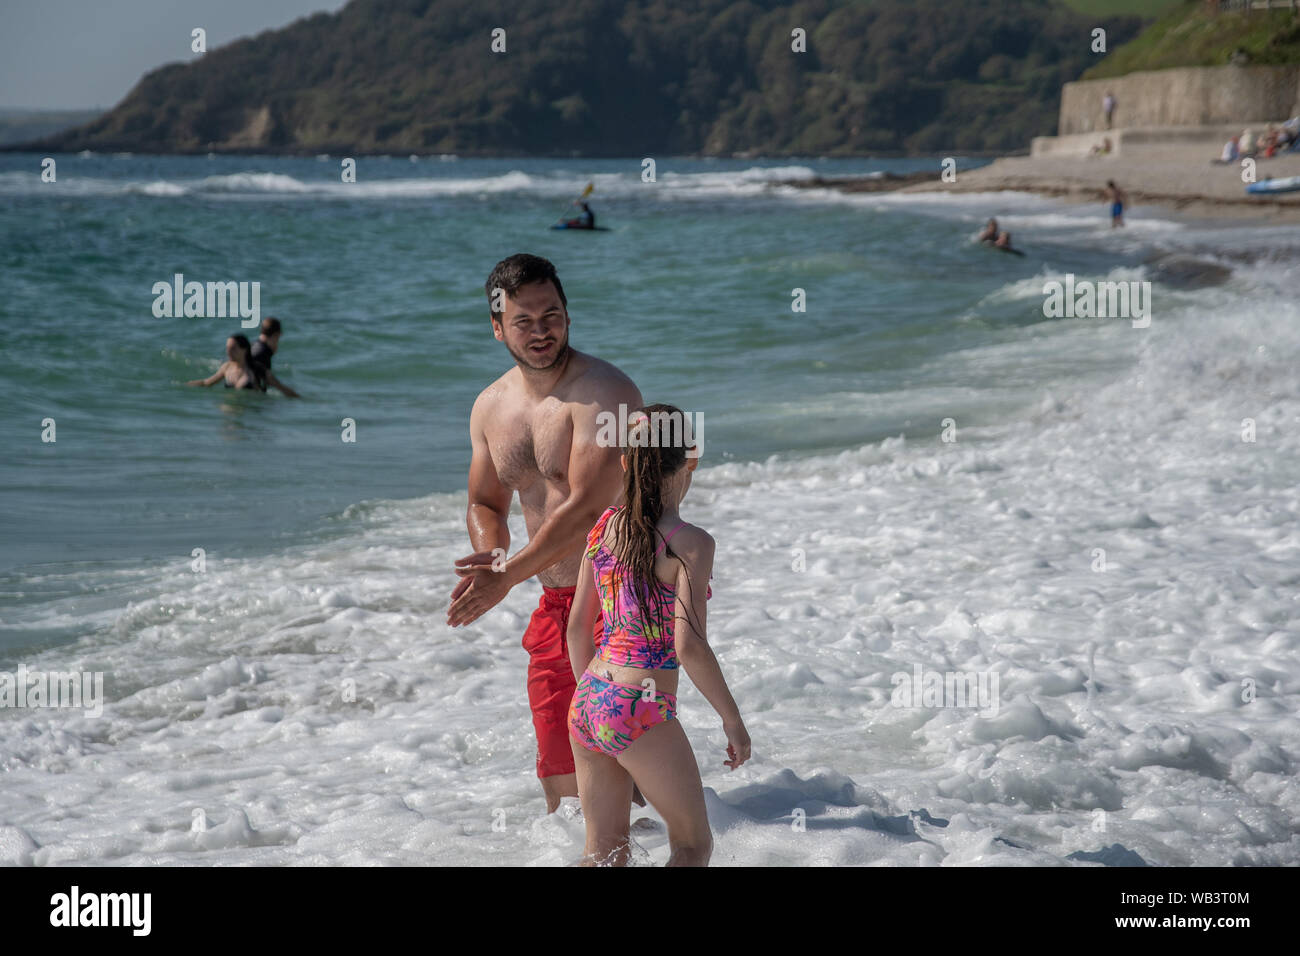 Gyllyngvase beach,Falmouth, Cornwall, UK. 24th August 2019. UK Weather. Freya Wilkes, aged 9, from Kent out on the beach at Falmouth making the most of the bank holiday heatwave. ( parental release obtained)  Credit Simon Maycock / Alamy Live News. Stock Photo